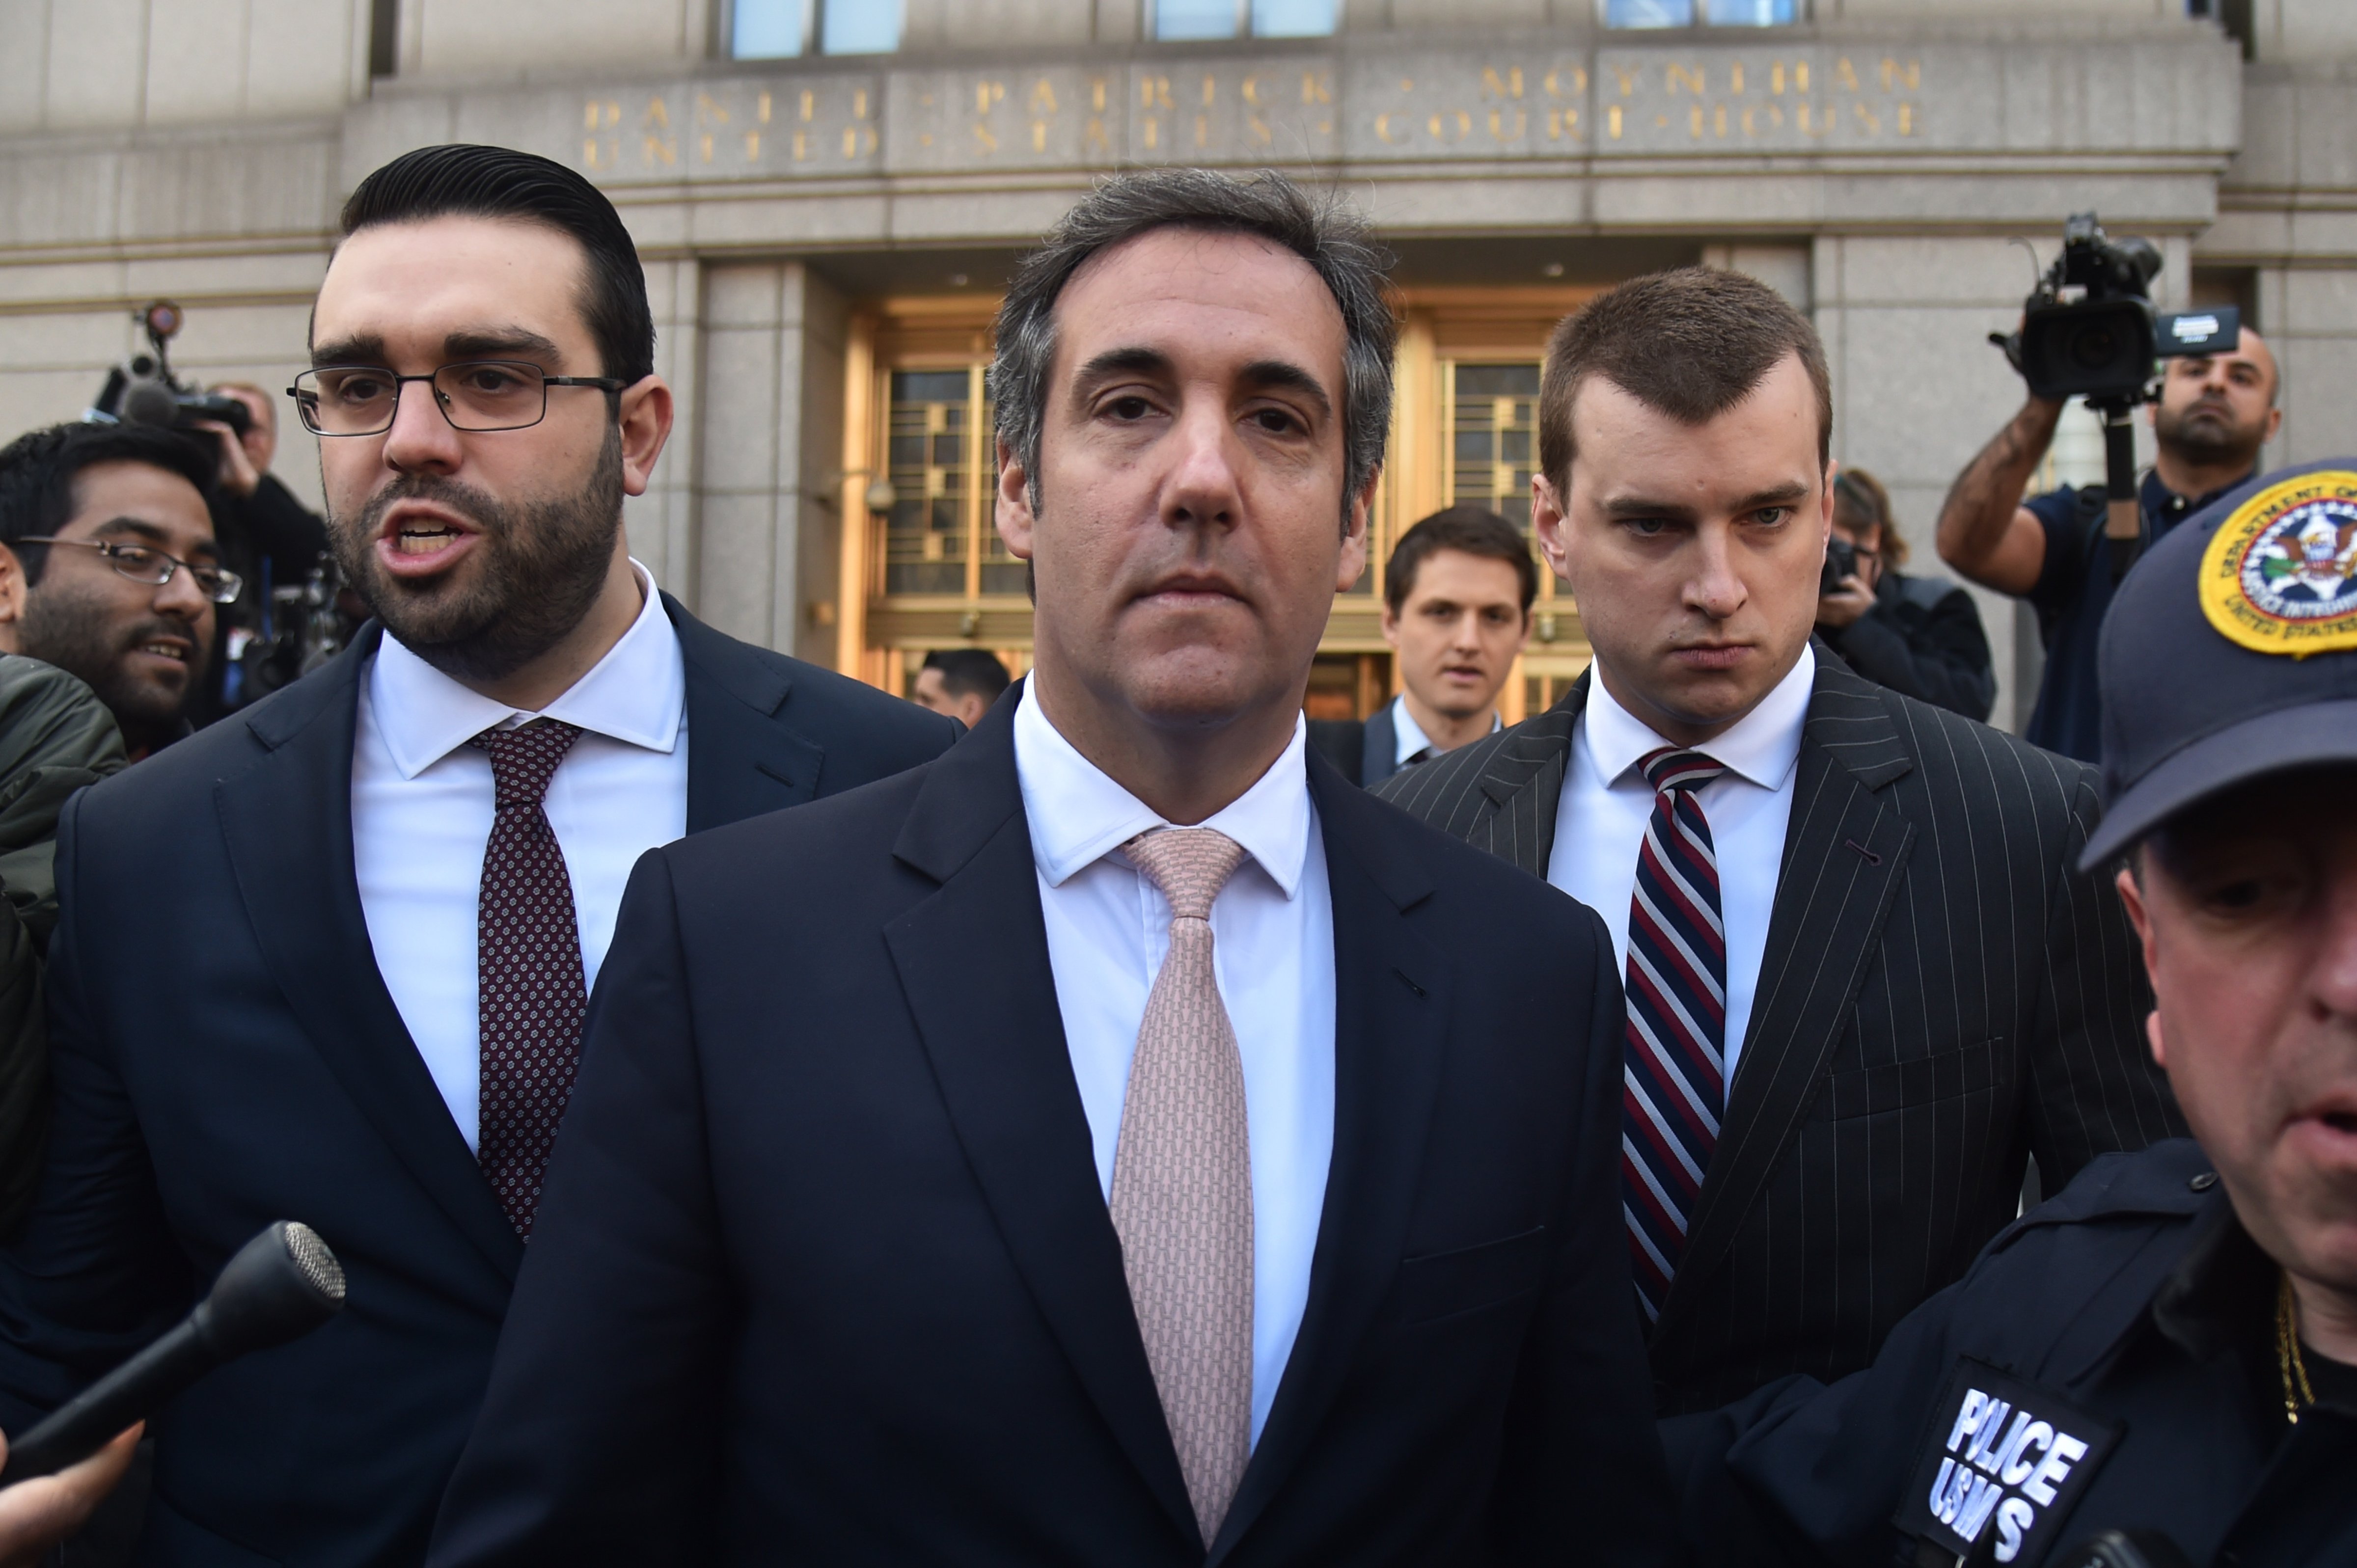 US President Donald Trump's personal lawyer Michael Cohen(C) leaves the US Courthouse in New York on April 26, 2018. (HECTOR RETAMAL&mdash;AFP/Getty Images)